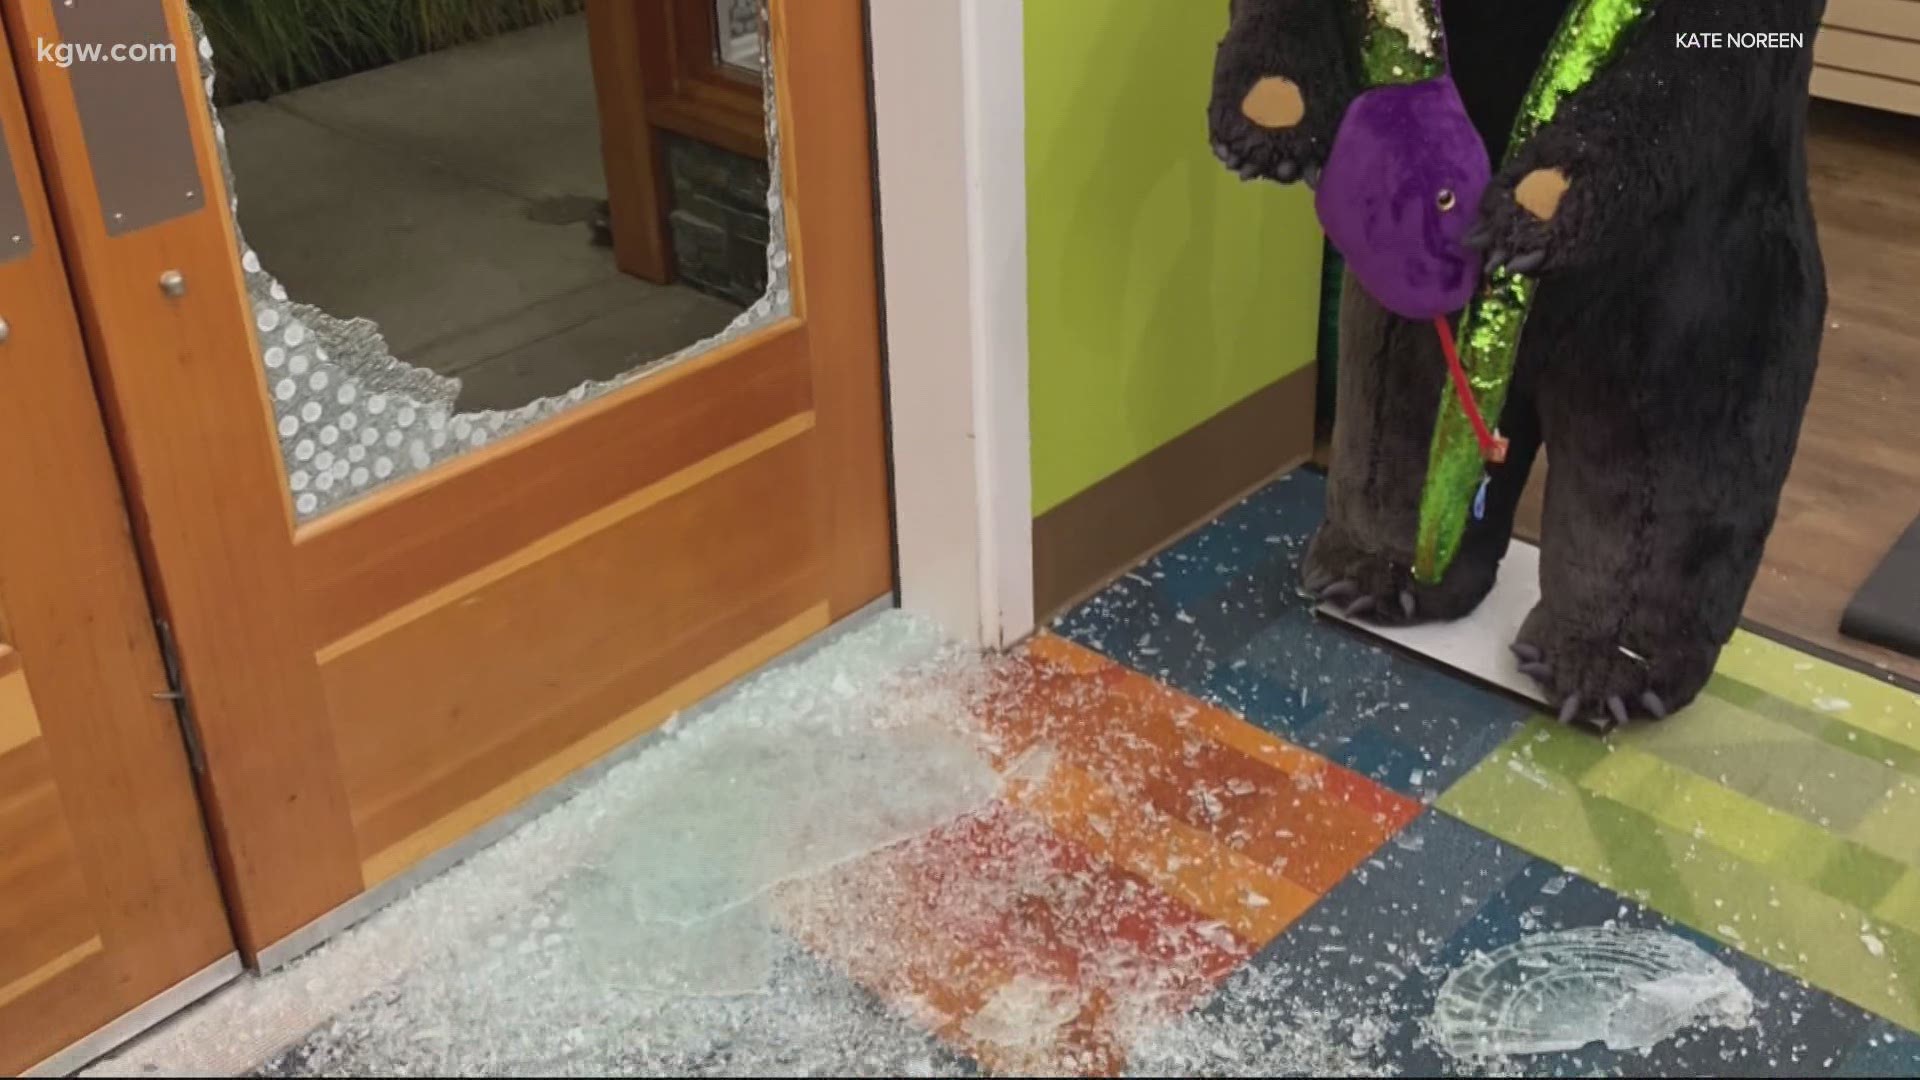 In a tough year for retail, a Portland toy store is trying to shake off a break-in. Jon Goodwin shows us how.